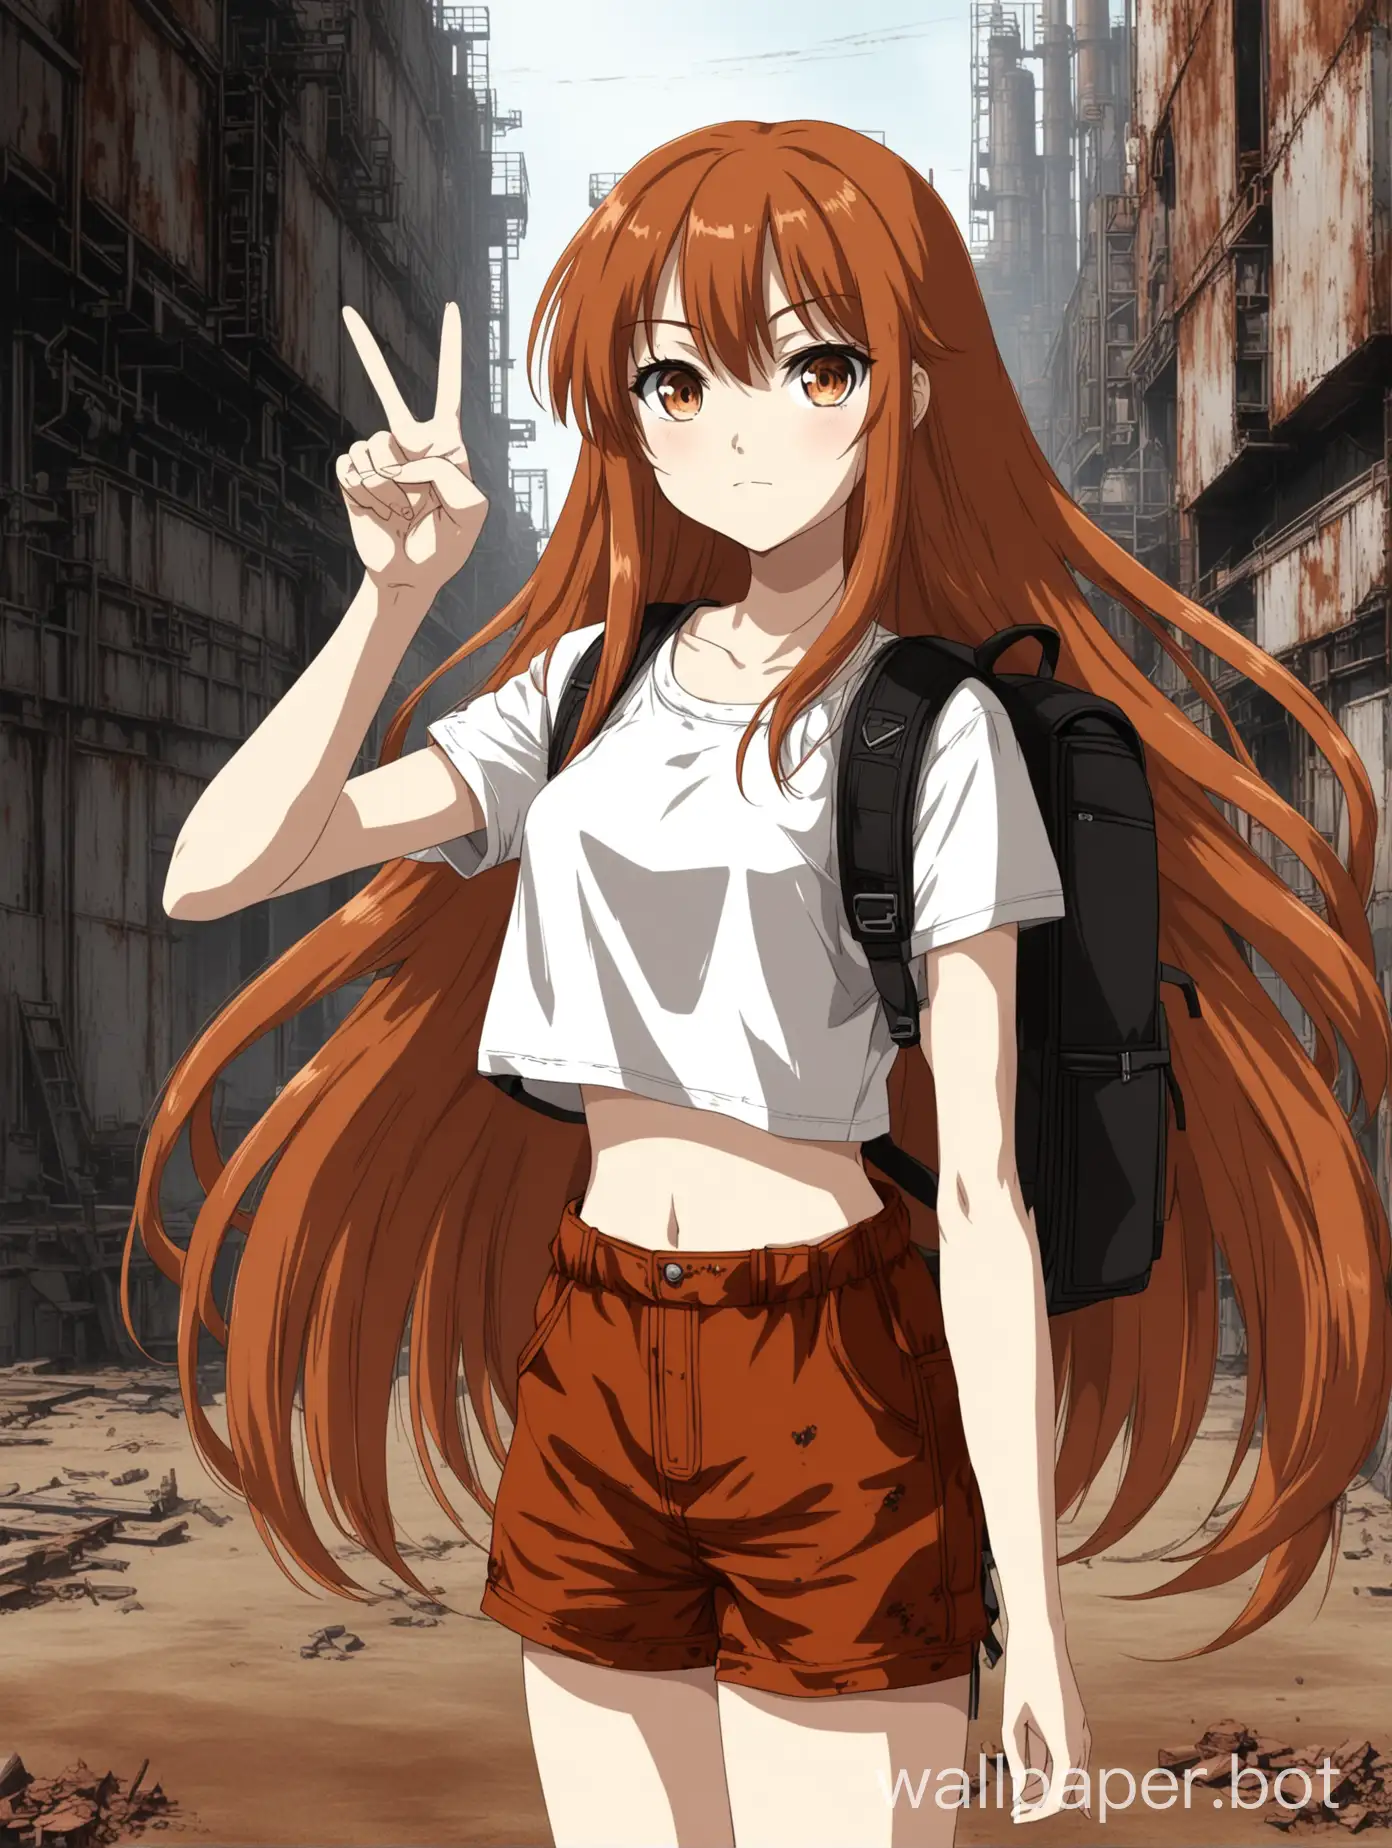 an anime girl in a white short crop top, with rust colored very long hair, wearing a backpack, doing the V sign in front of her eye and with brown industrialistic shorts